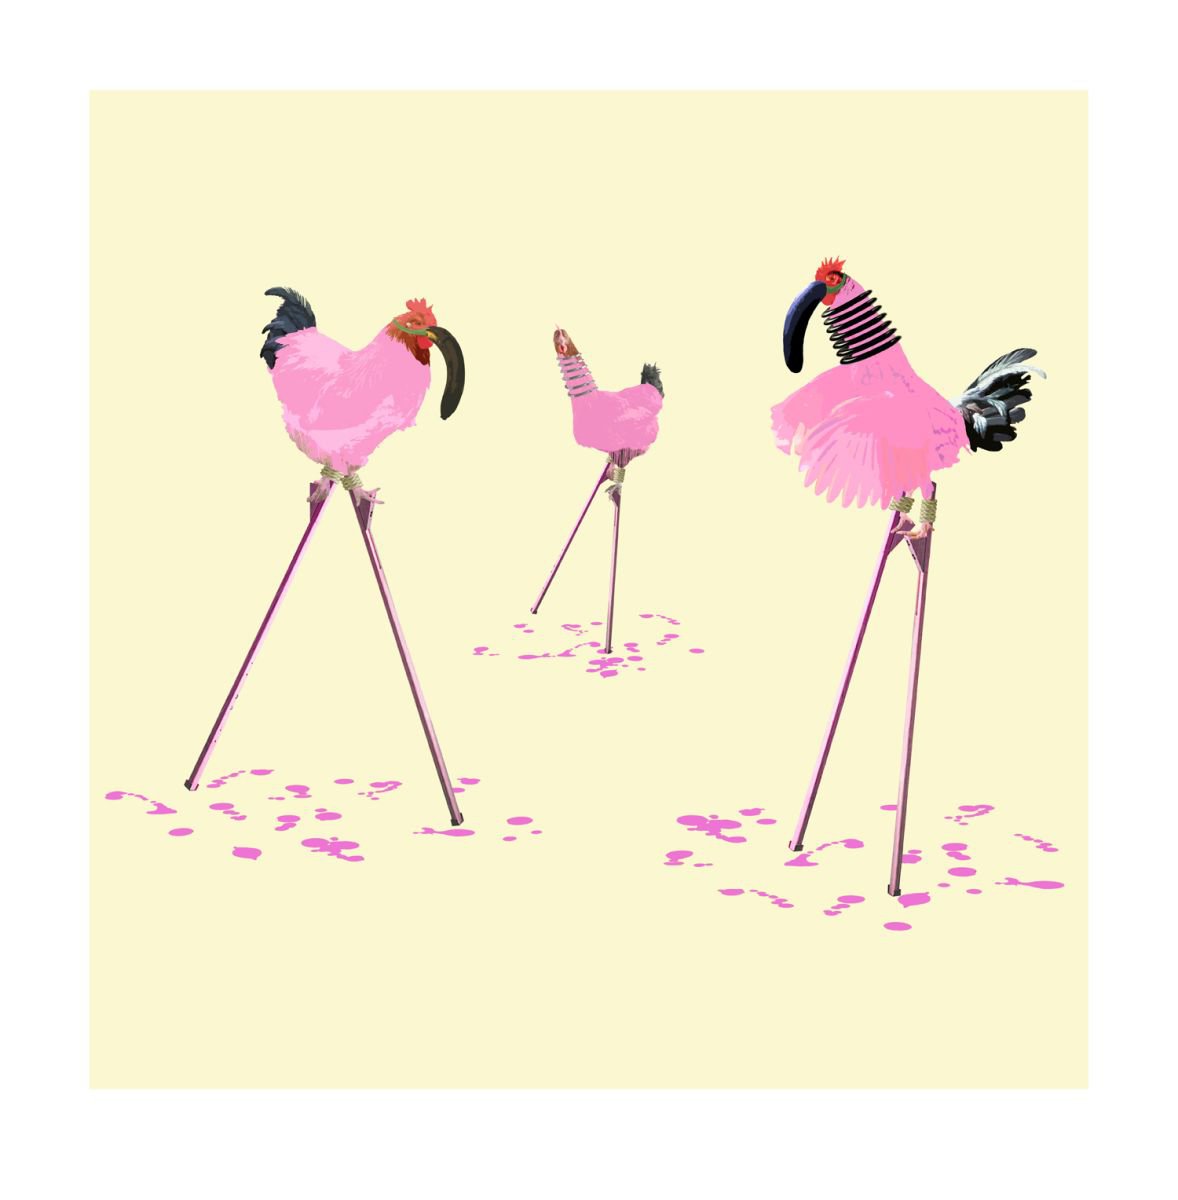 The Chickens Who Wanted to be Flamingos by Carl Moore